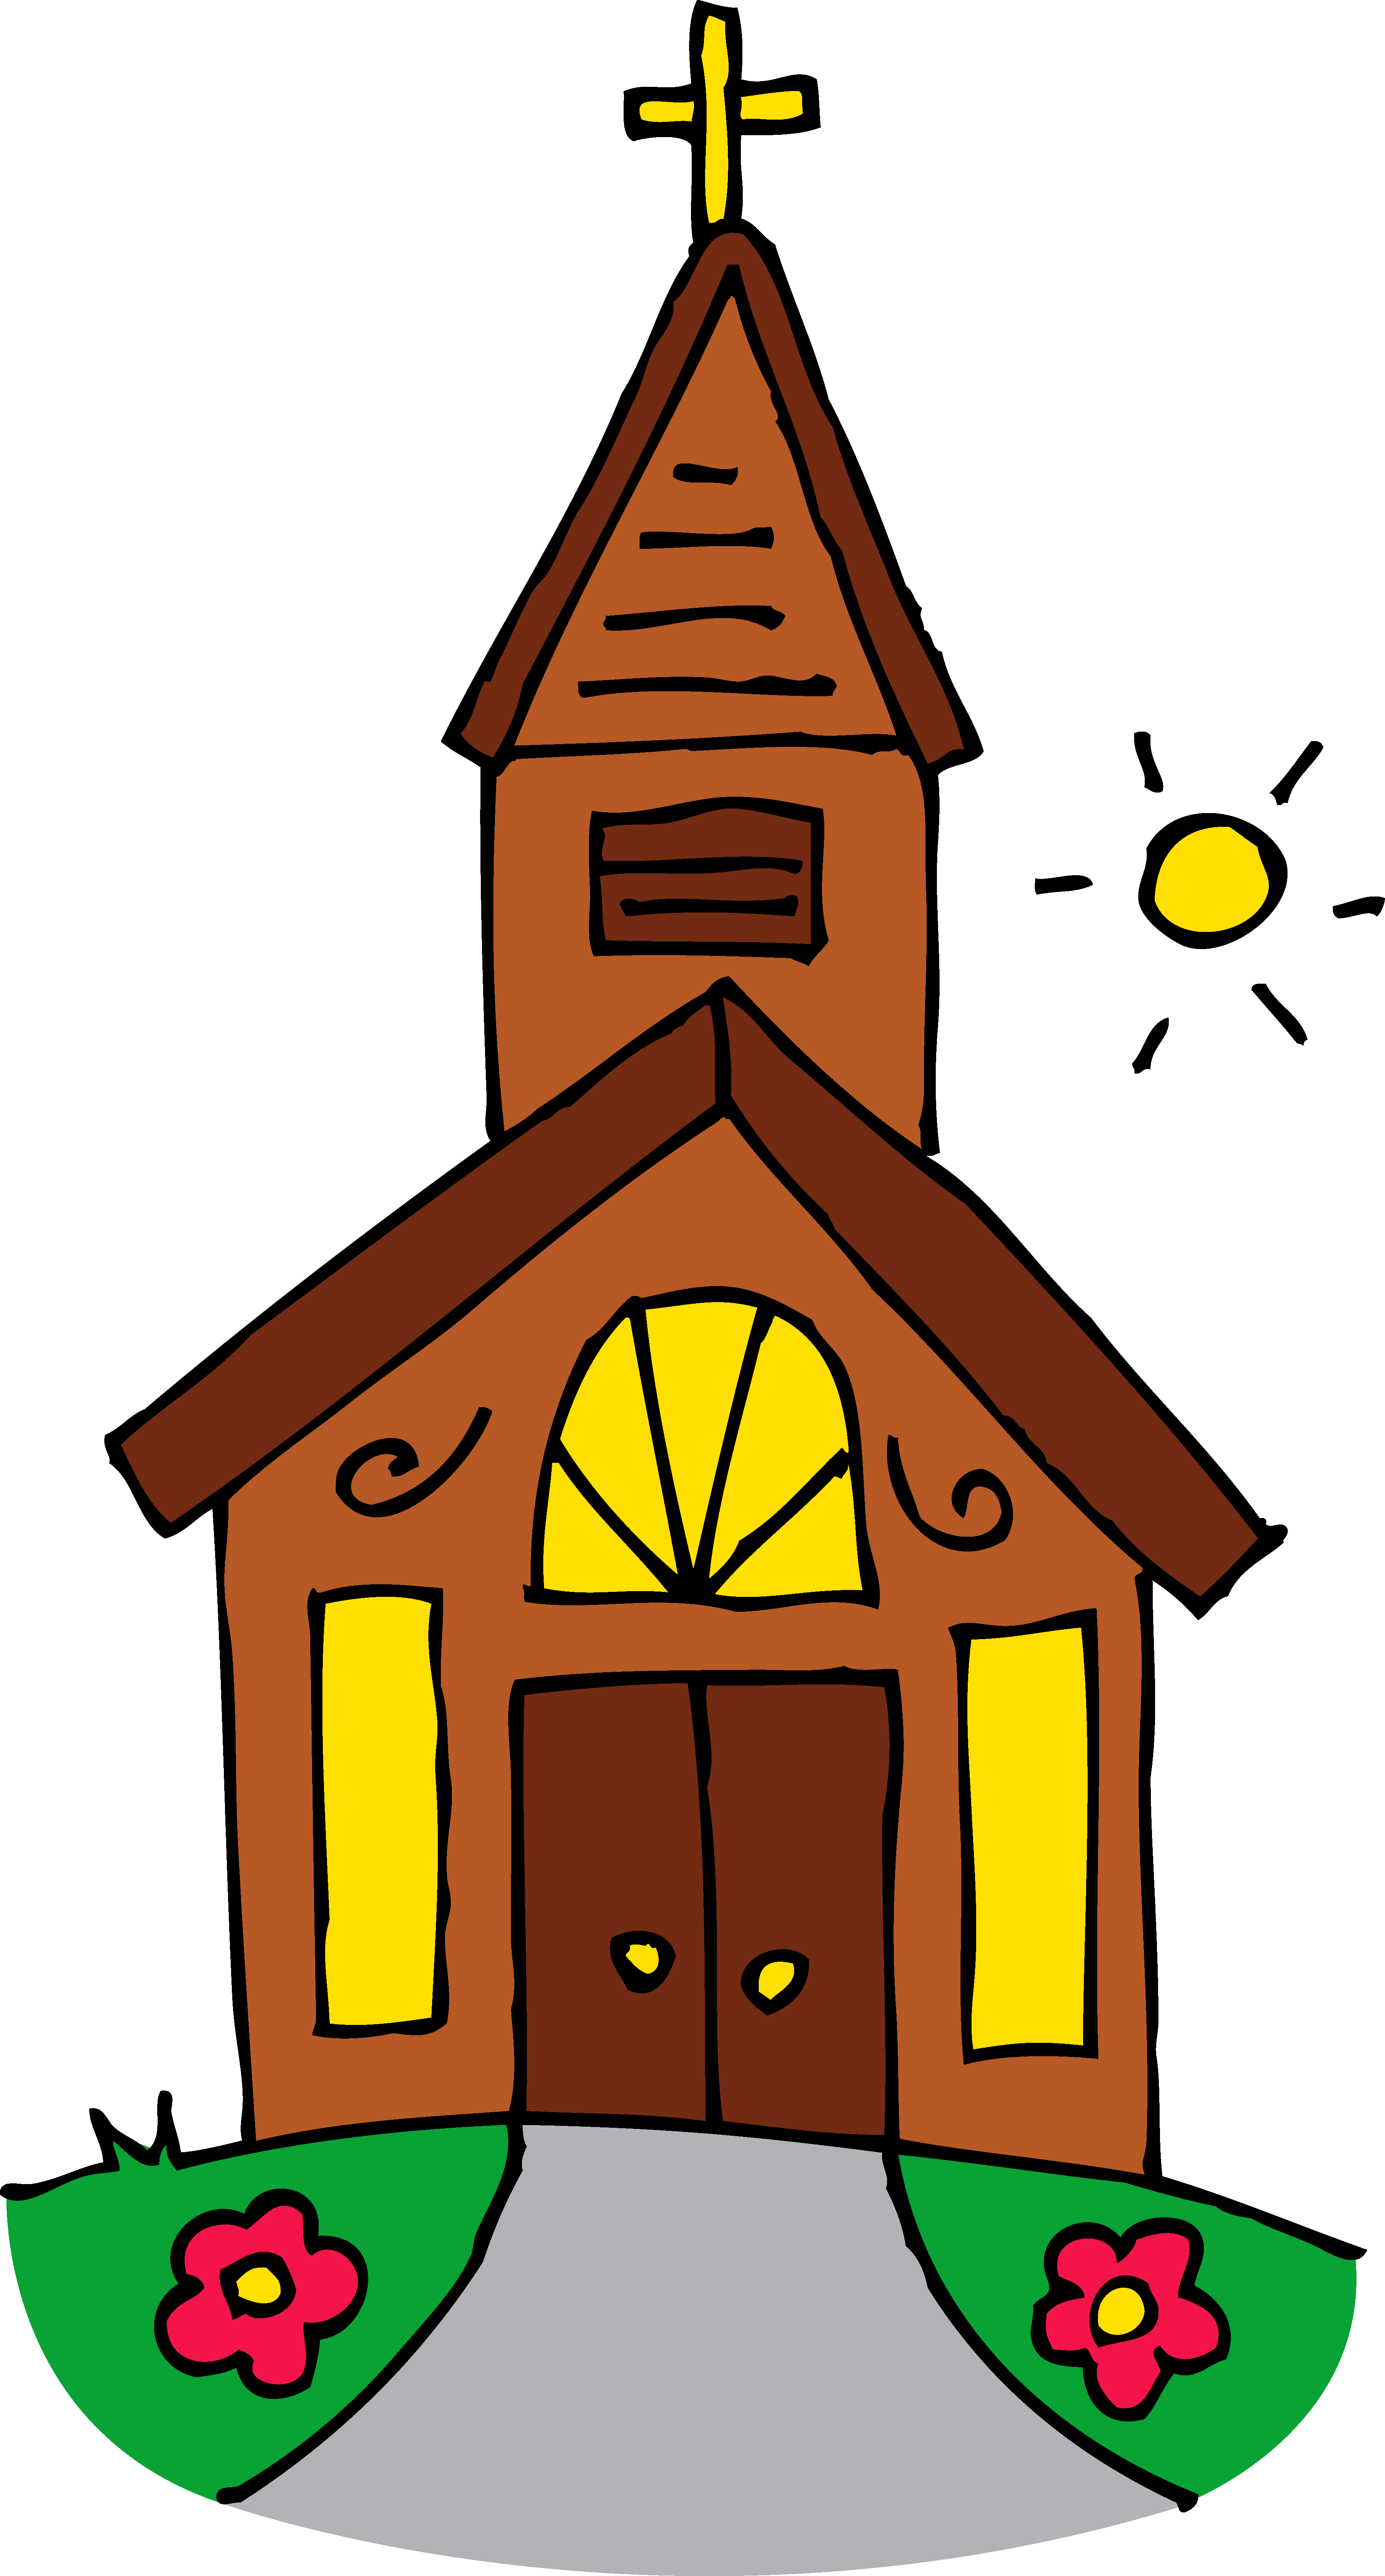 Free Images Church, Download Free Clip Art, Free Clip Art on 